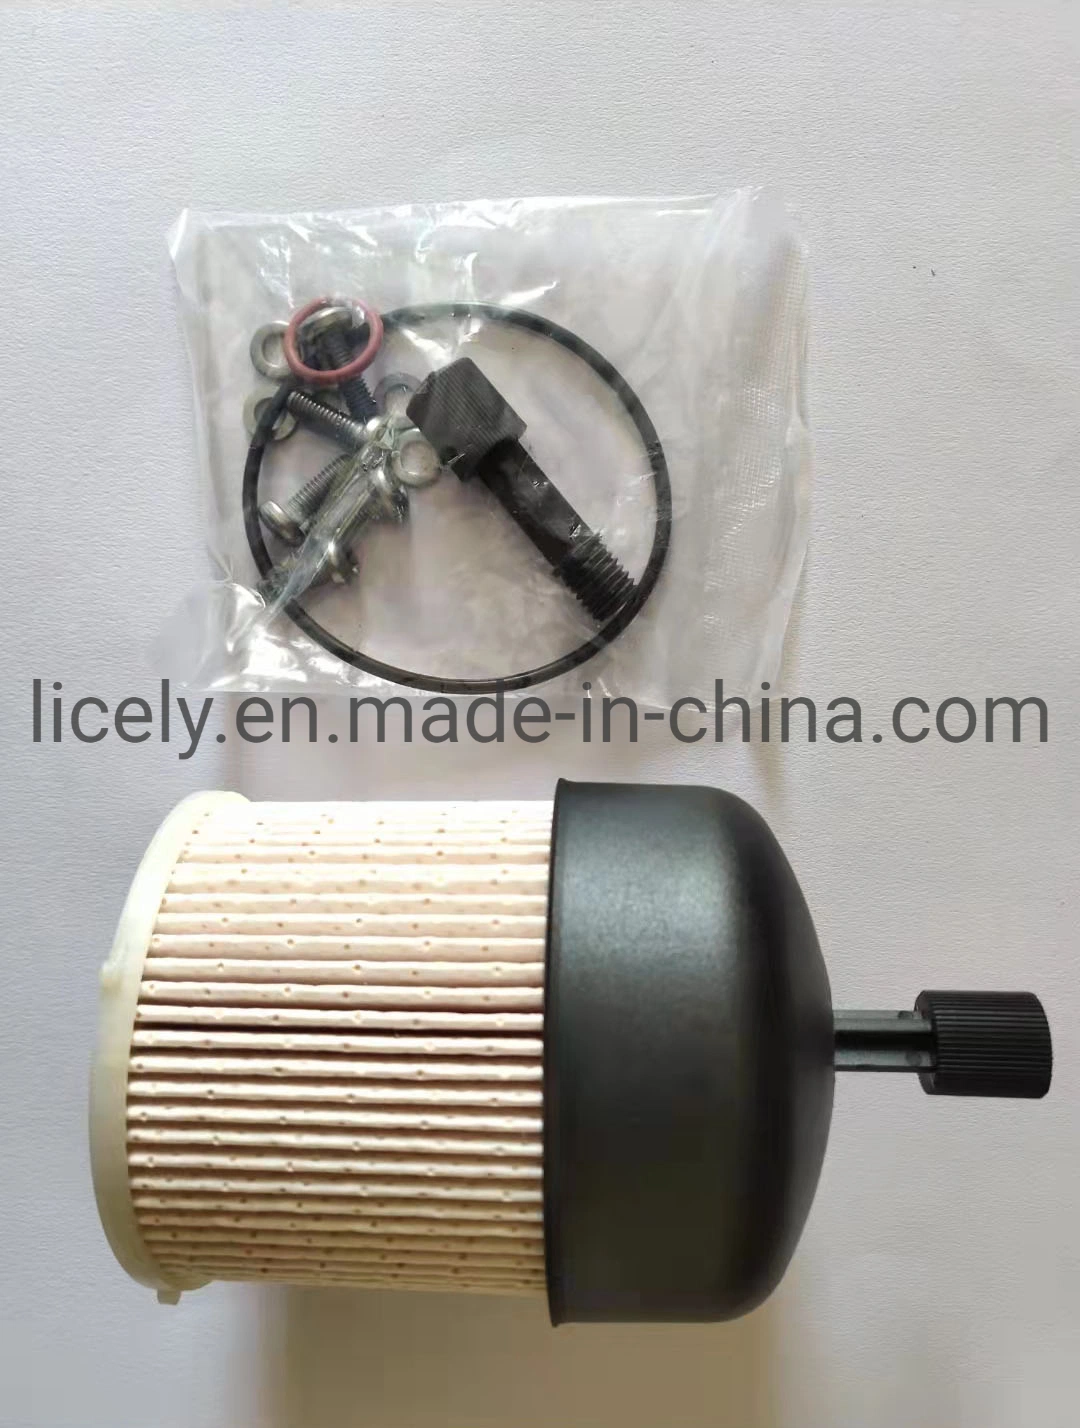 Fuel Filter 164039594r/6070900752/164037803r/164038815r for Renault, Composite Paper Material, with High performance